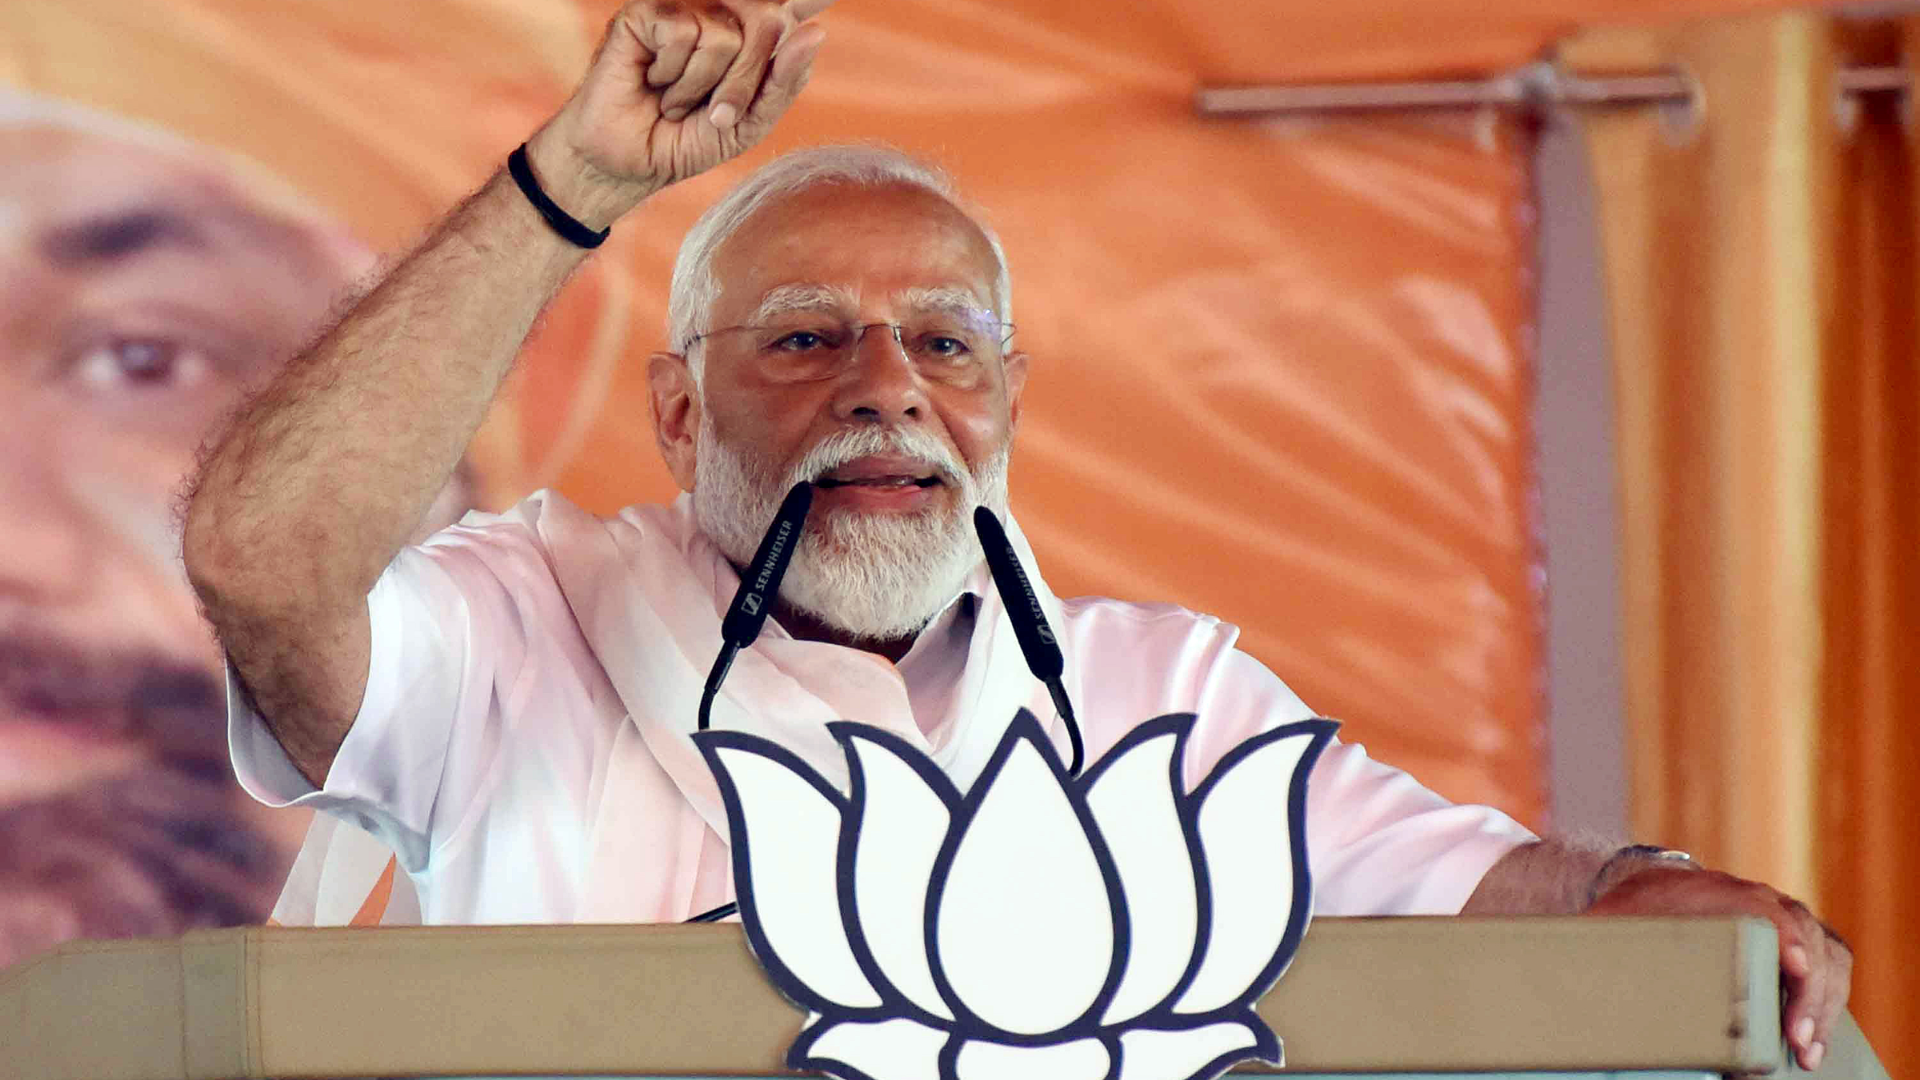 Lok Sabha polls :PM Modi To Conduct rally, Roadshow In UP today Also Scheduled To Visit Ajmer